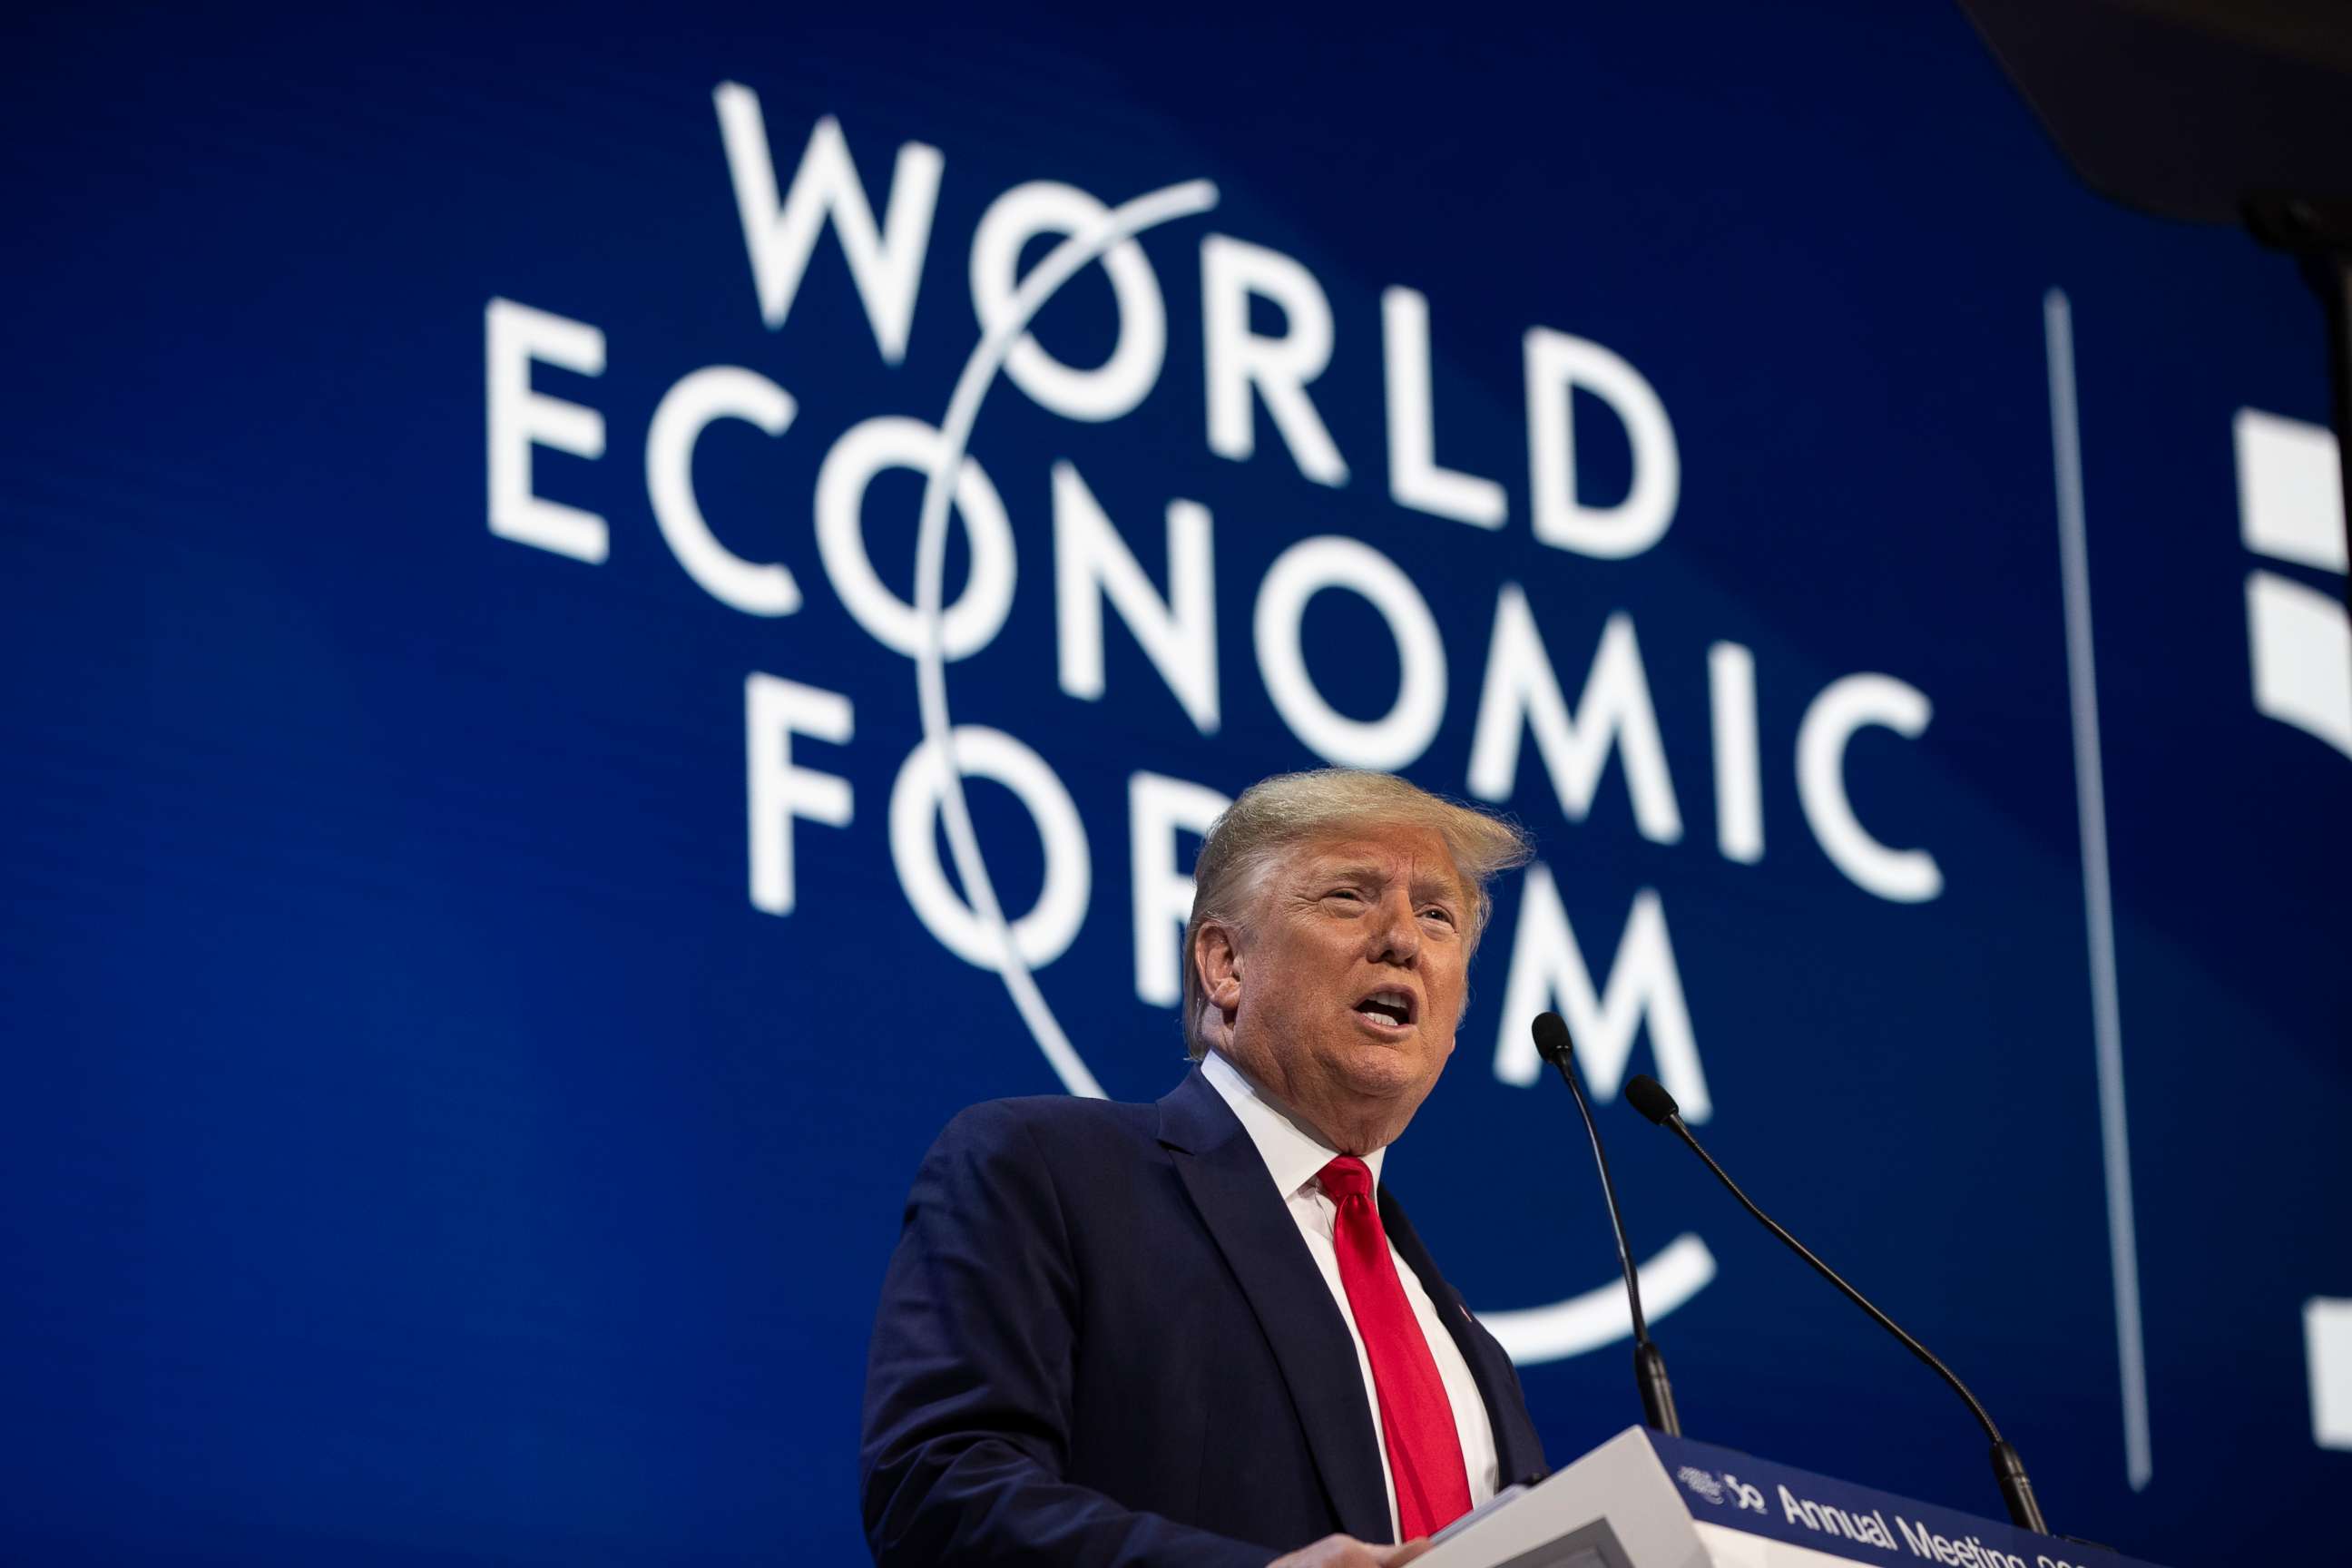 PHOTO: U.S. President Donald Trump delivers the opening remarks at the World Economic Forum in Davos, Switzerland, Jan. 21, 2020.